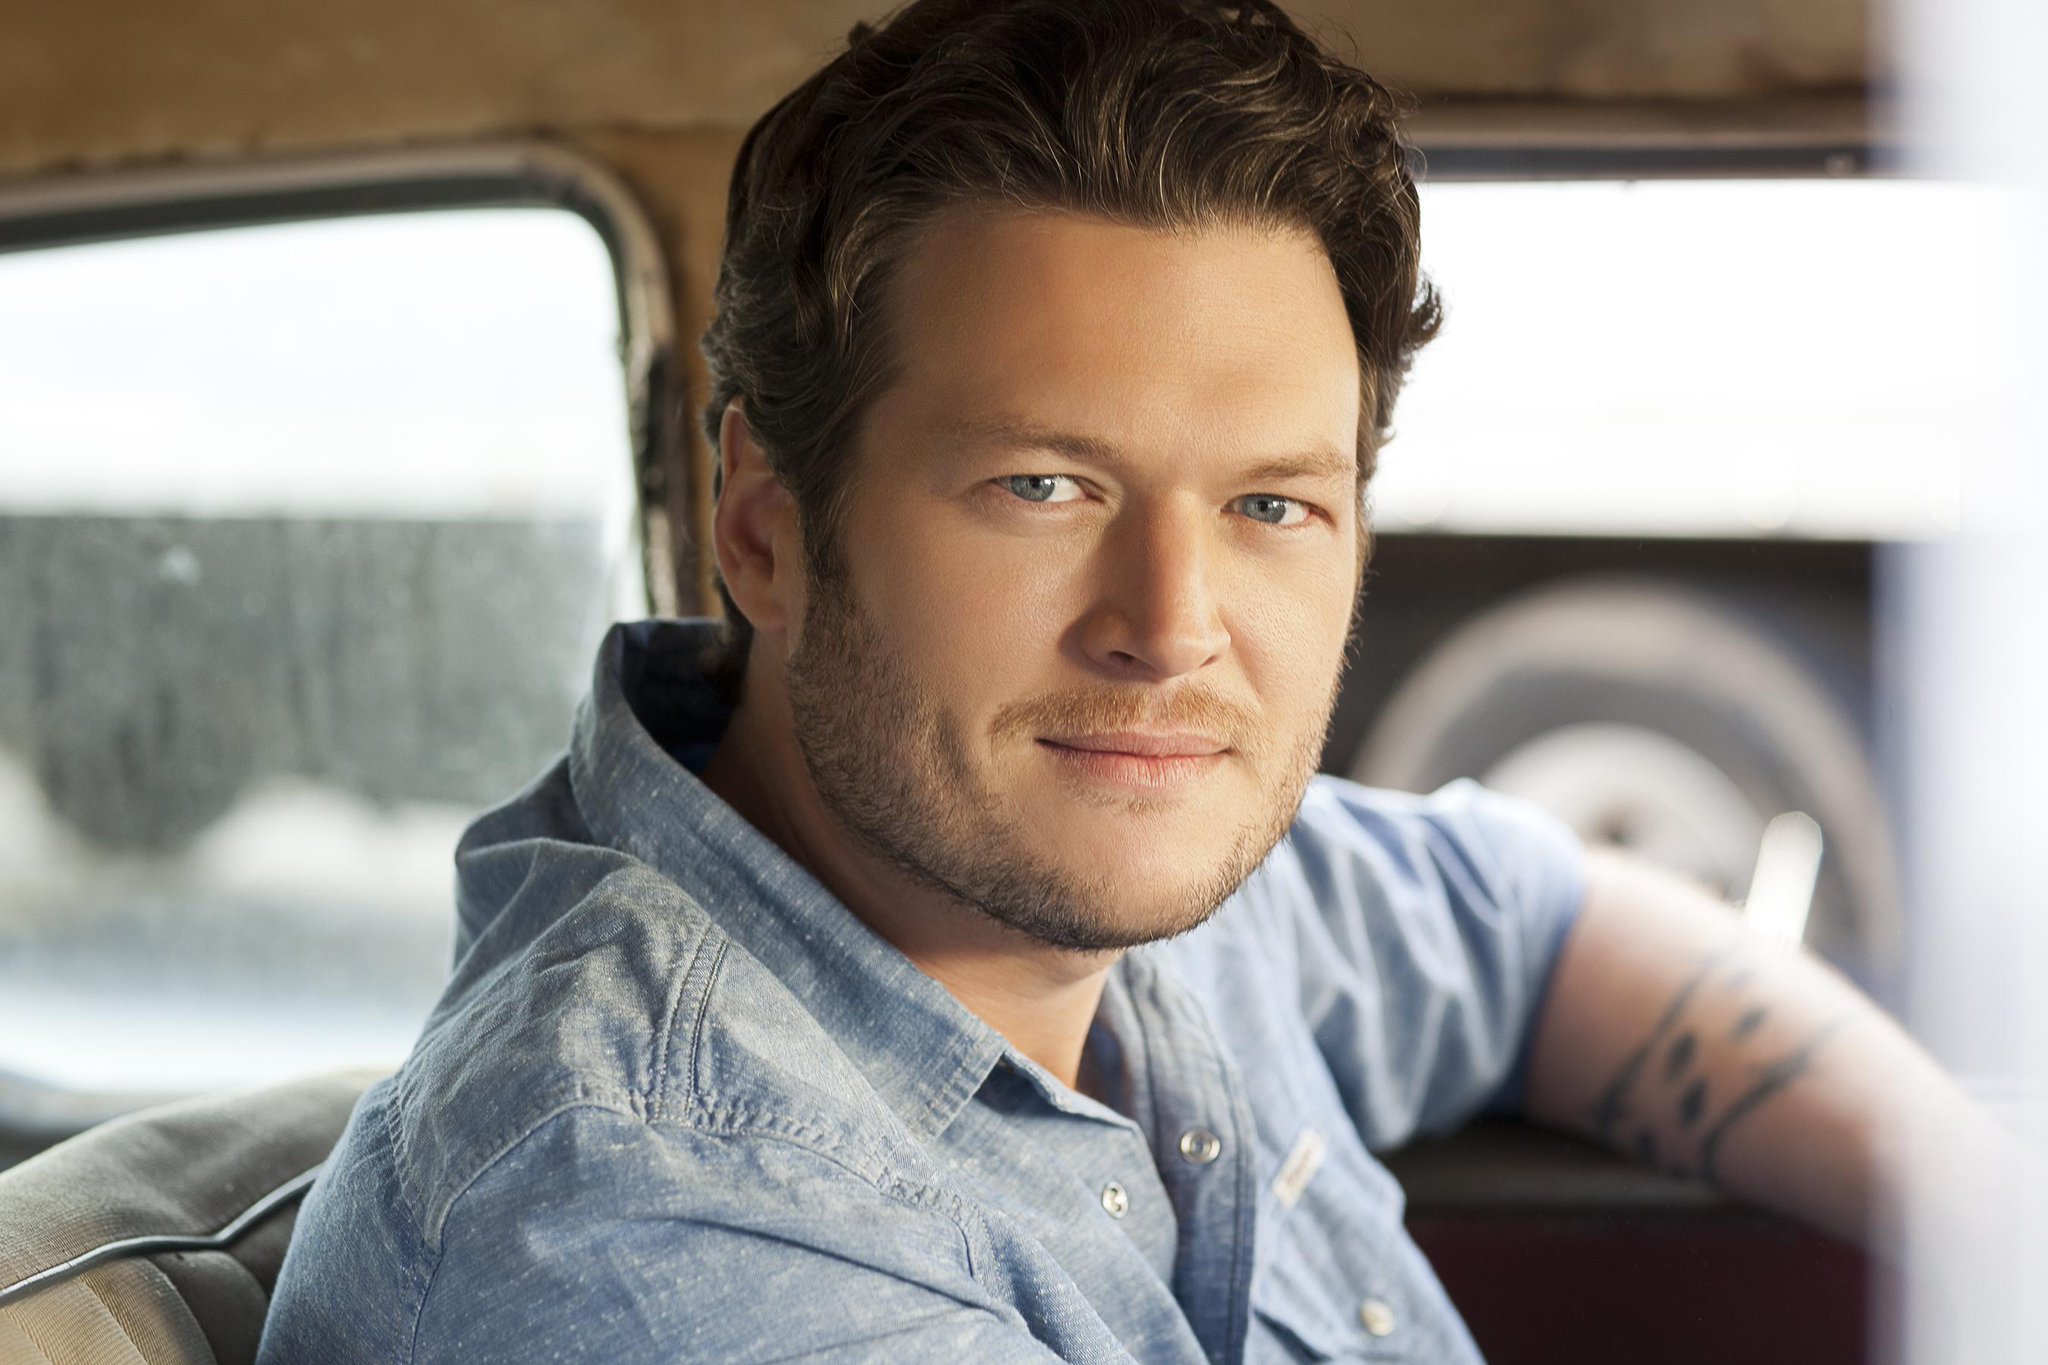 Happy 39th Birthday to Blake Shelton! Wishing you all the best   